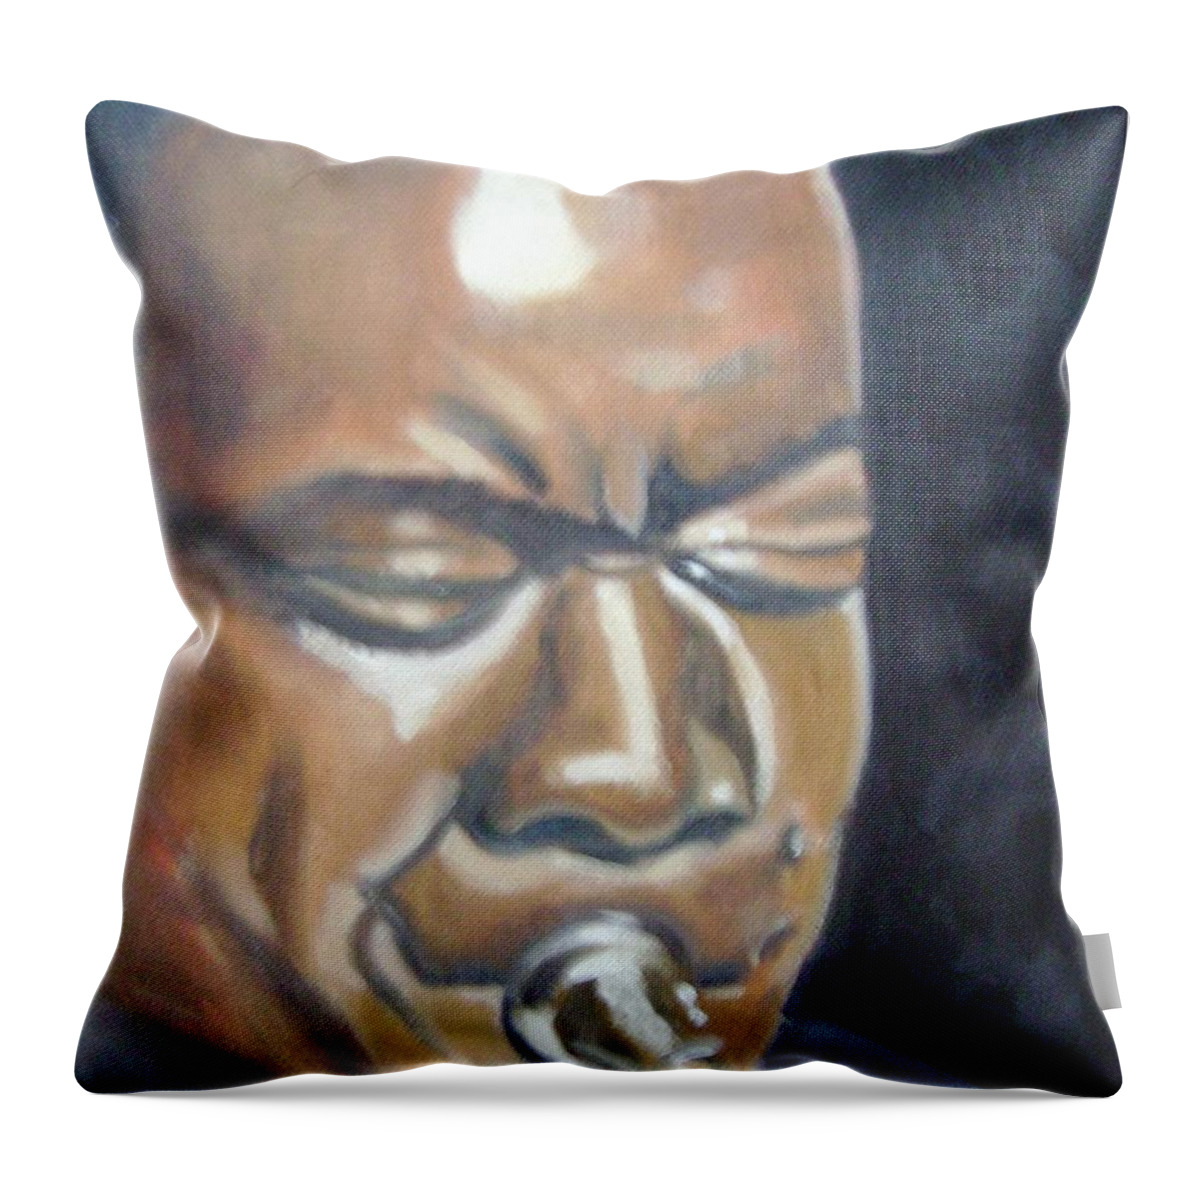 Louis Armstrong Throw Pillow featuring the painting Louis Armstrong by Toni Berry